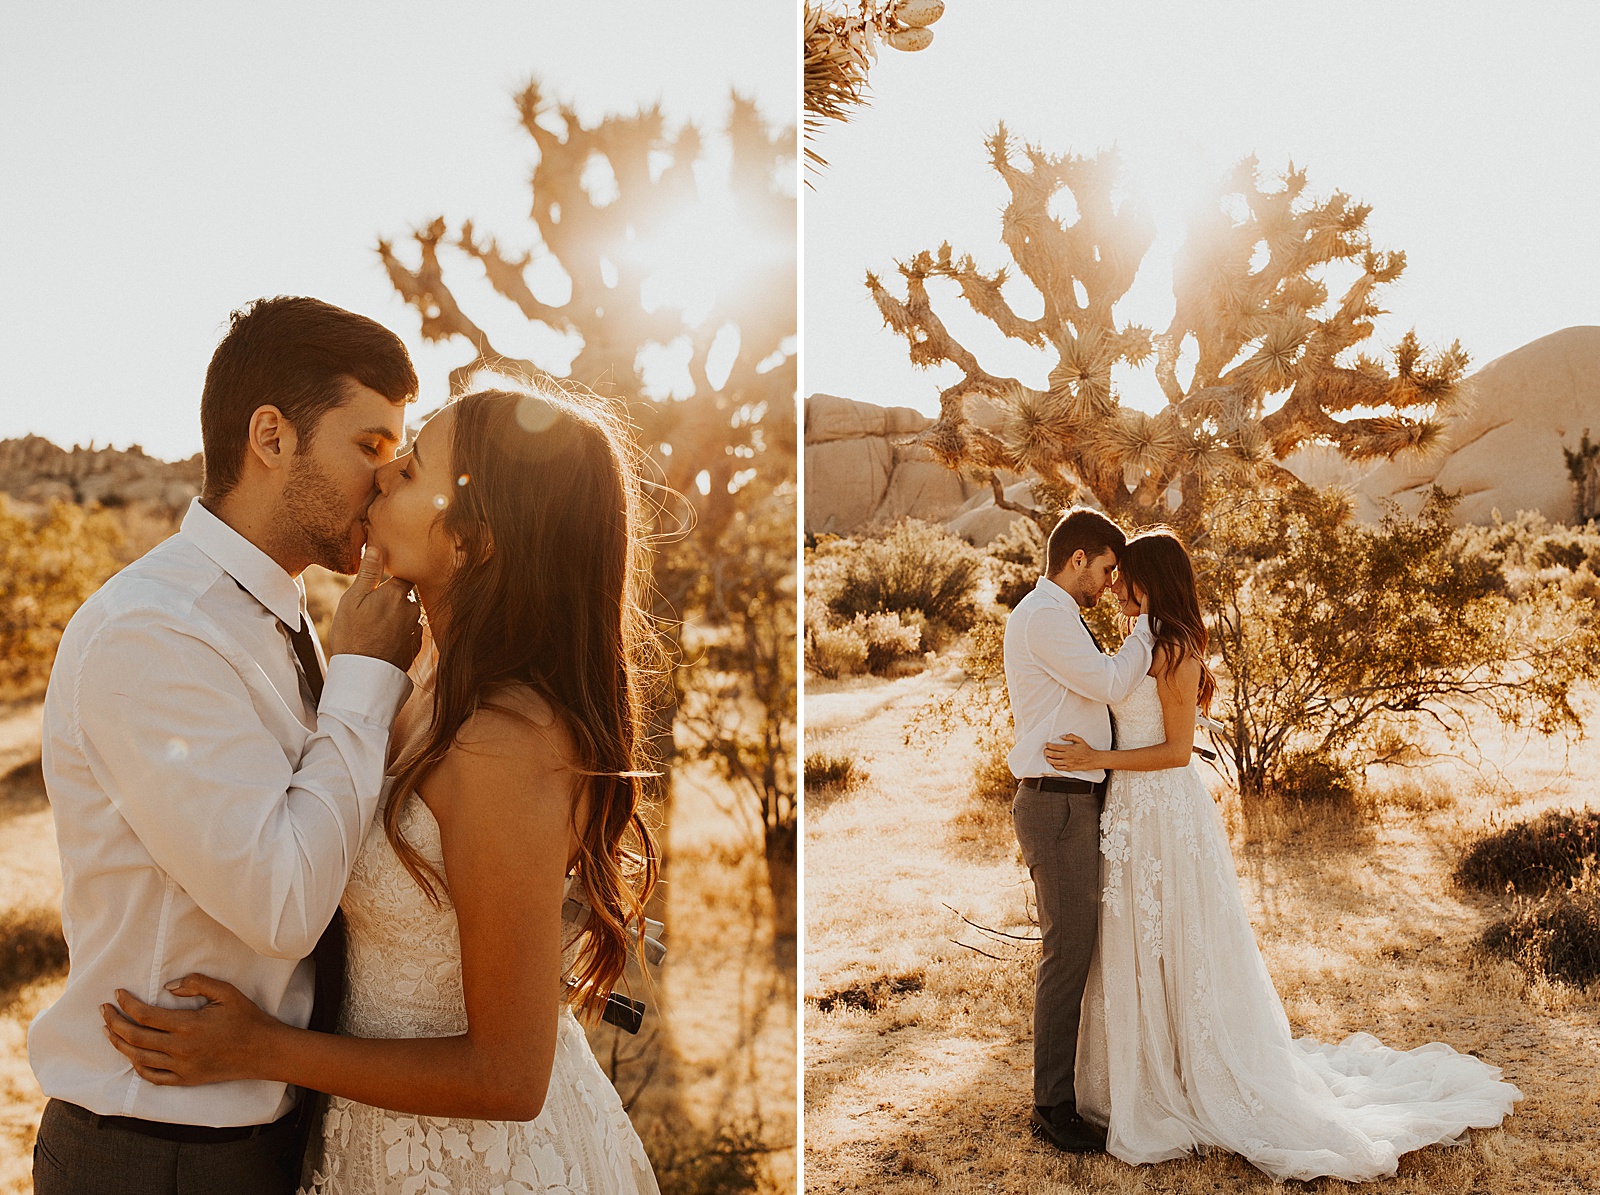 A bride and groom photo at their elopement in Joshua Tree National Park.